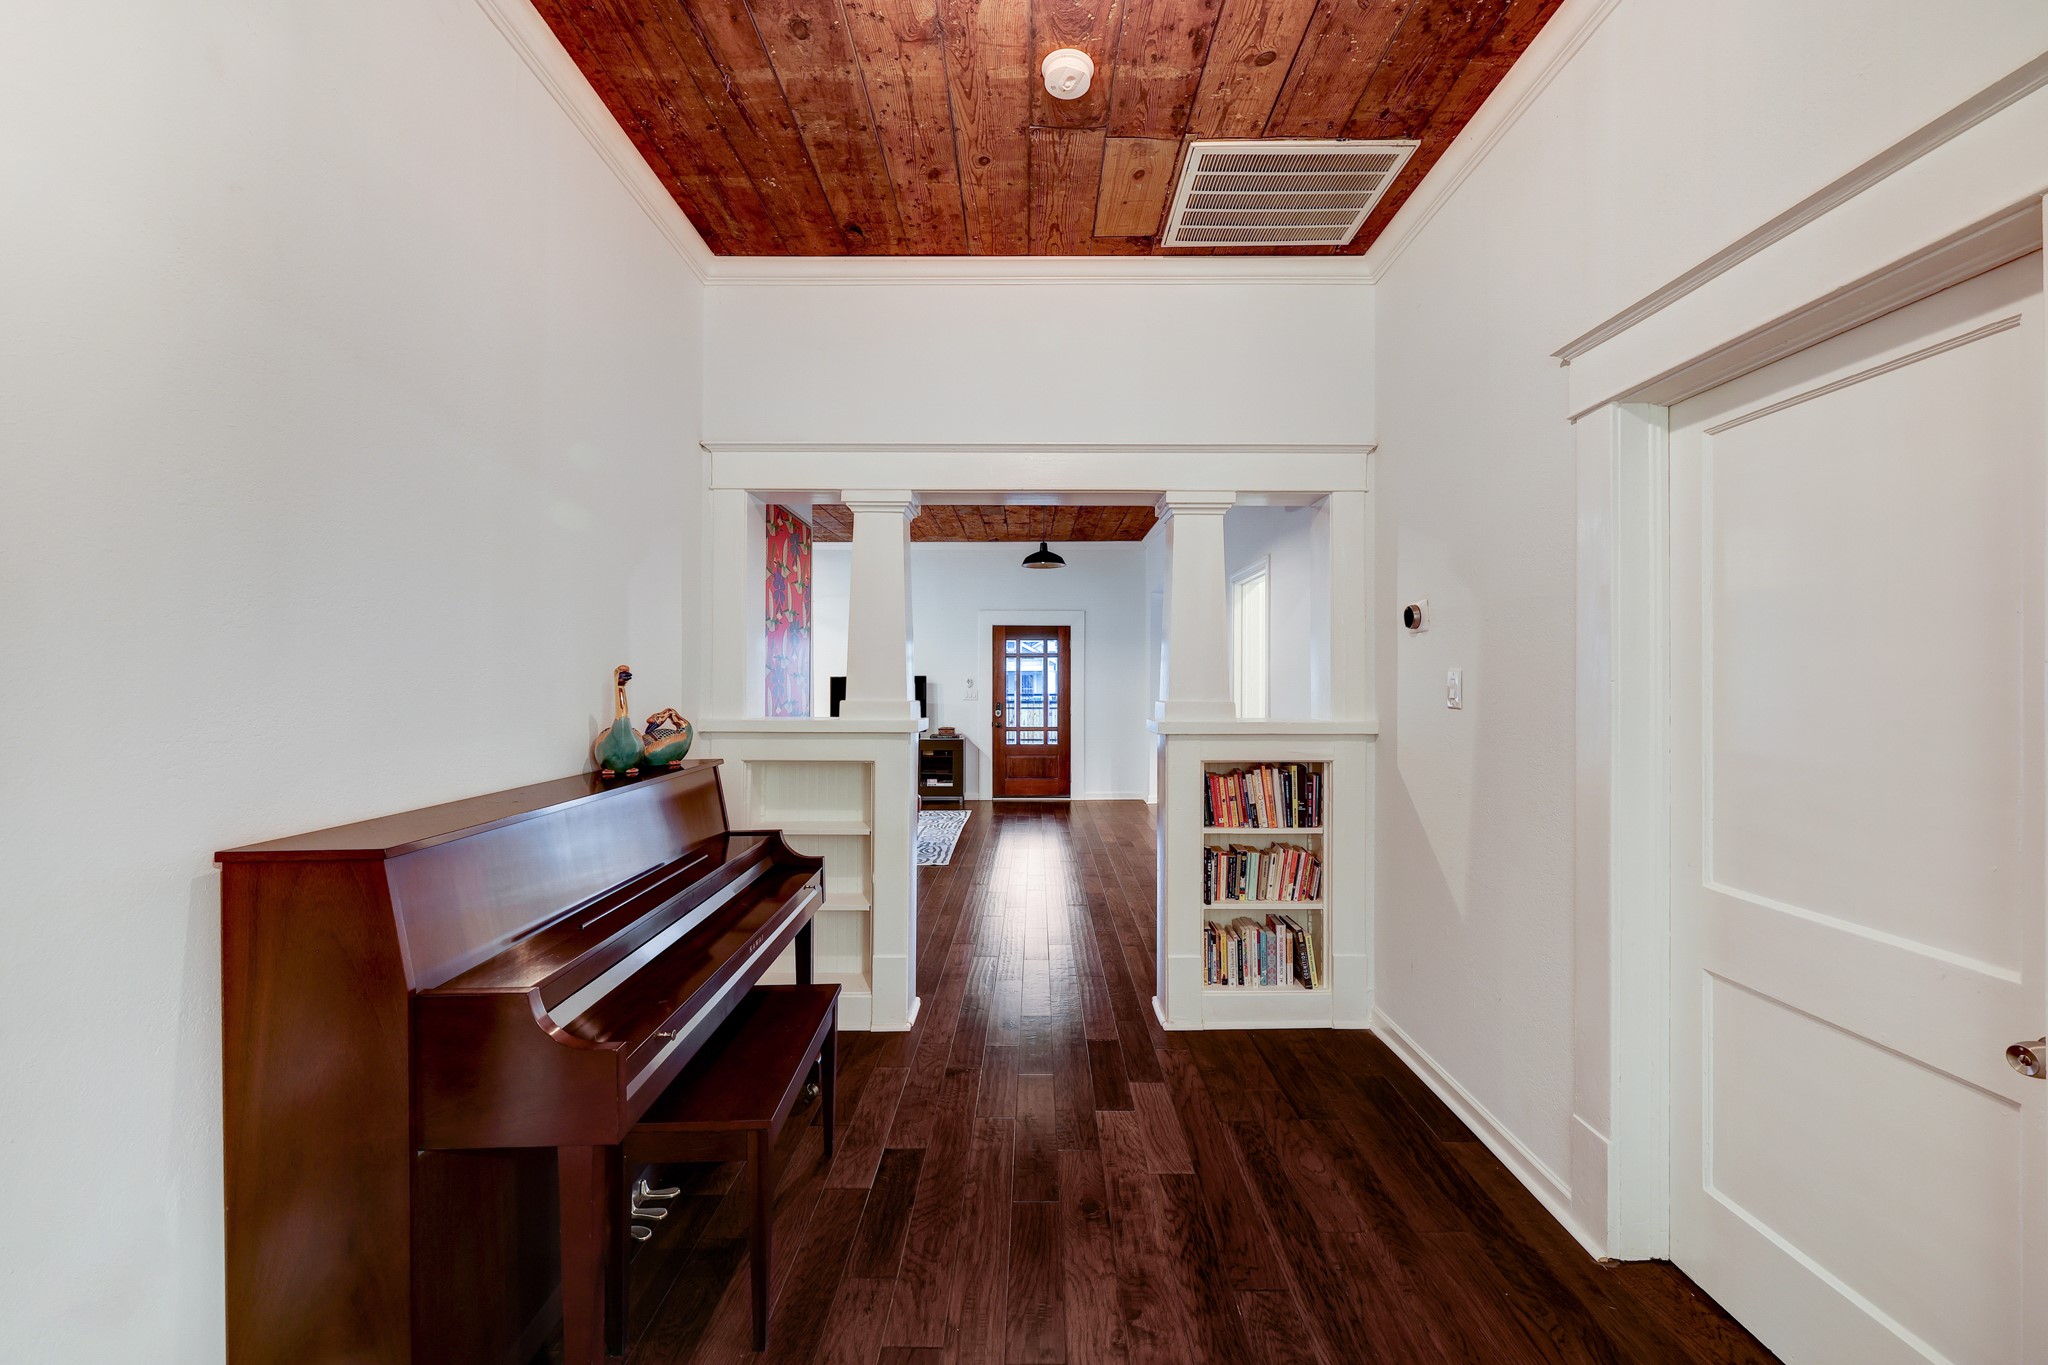 This nook with original craftsmen built-ins can flex into a reading room, office space, endless possibilities! Behind the door to the right is a secondary room.